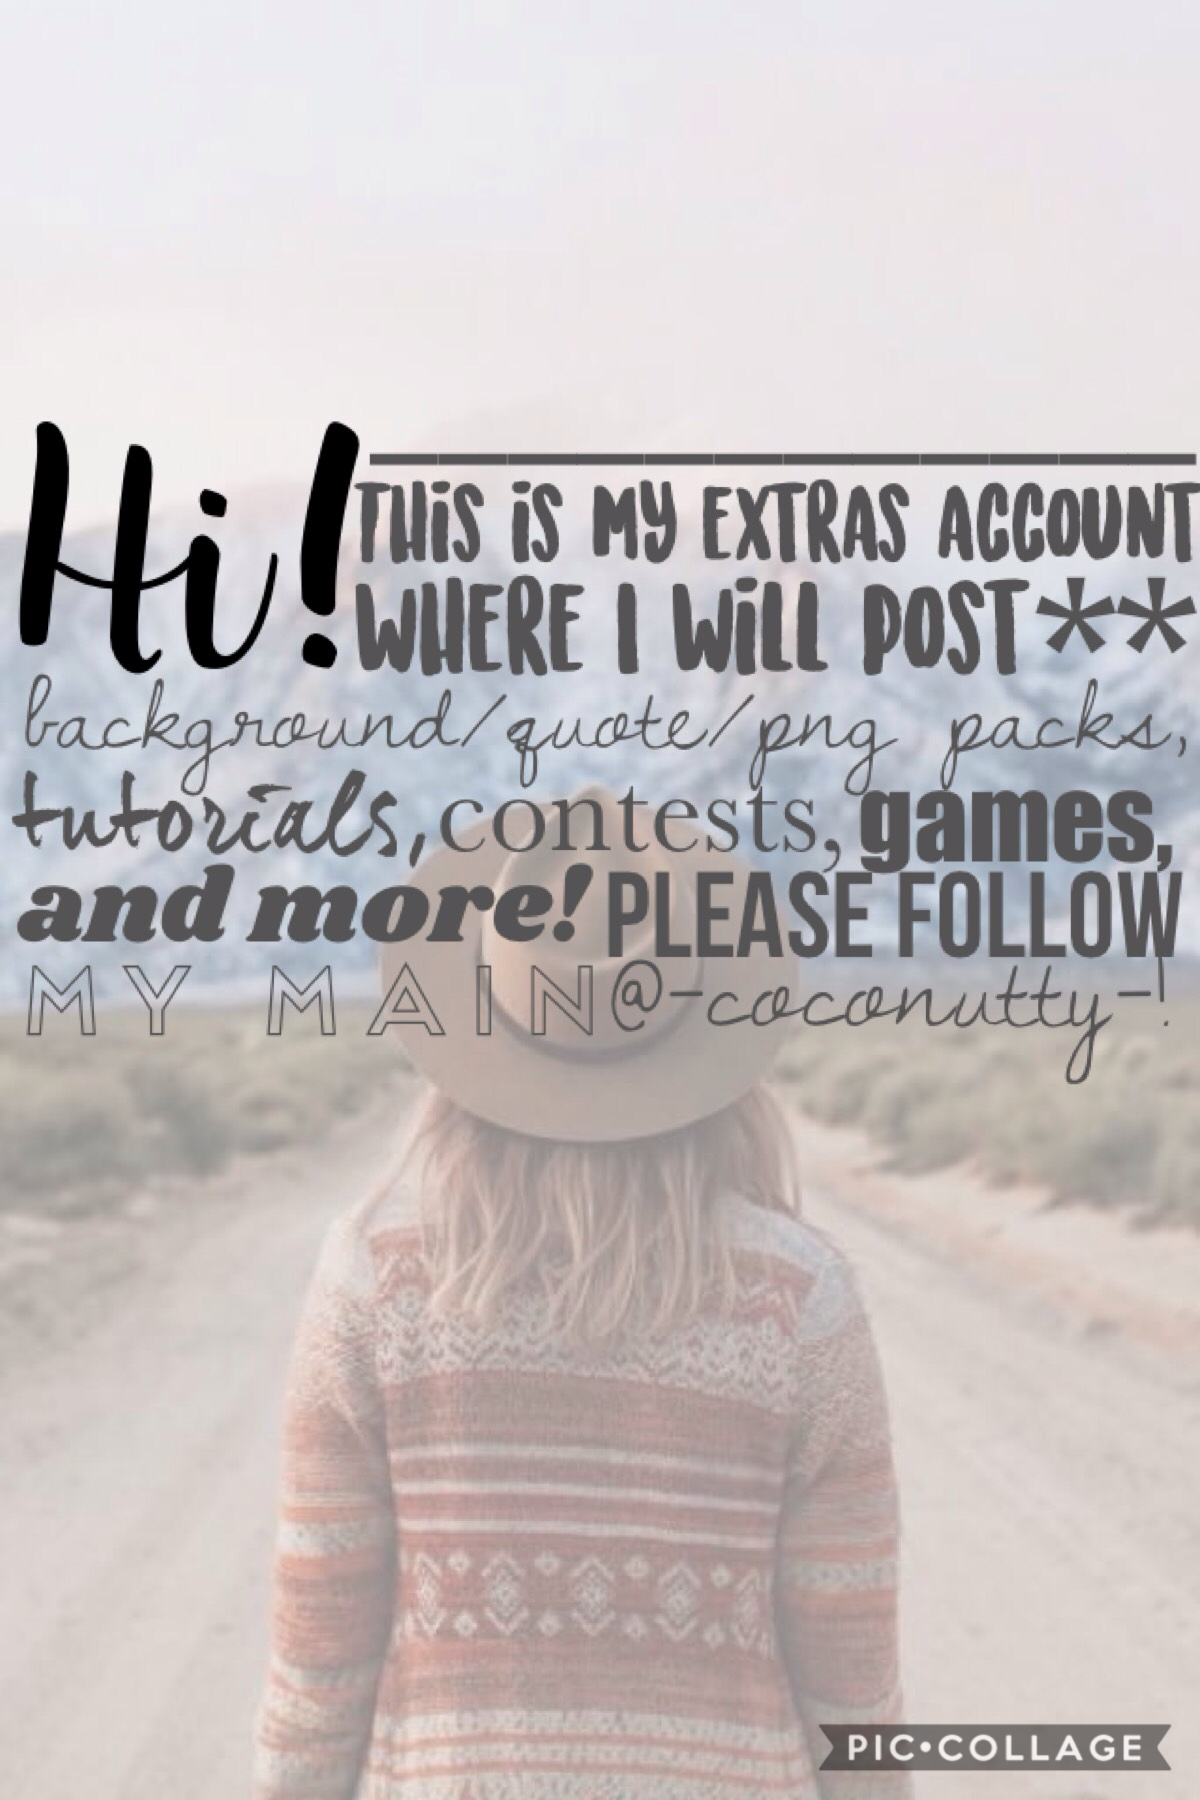 Hi! This is my extras account! Please follow my main @-coconutty-! 